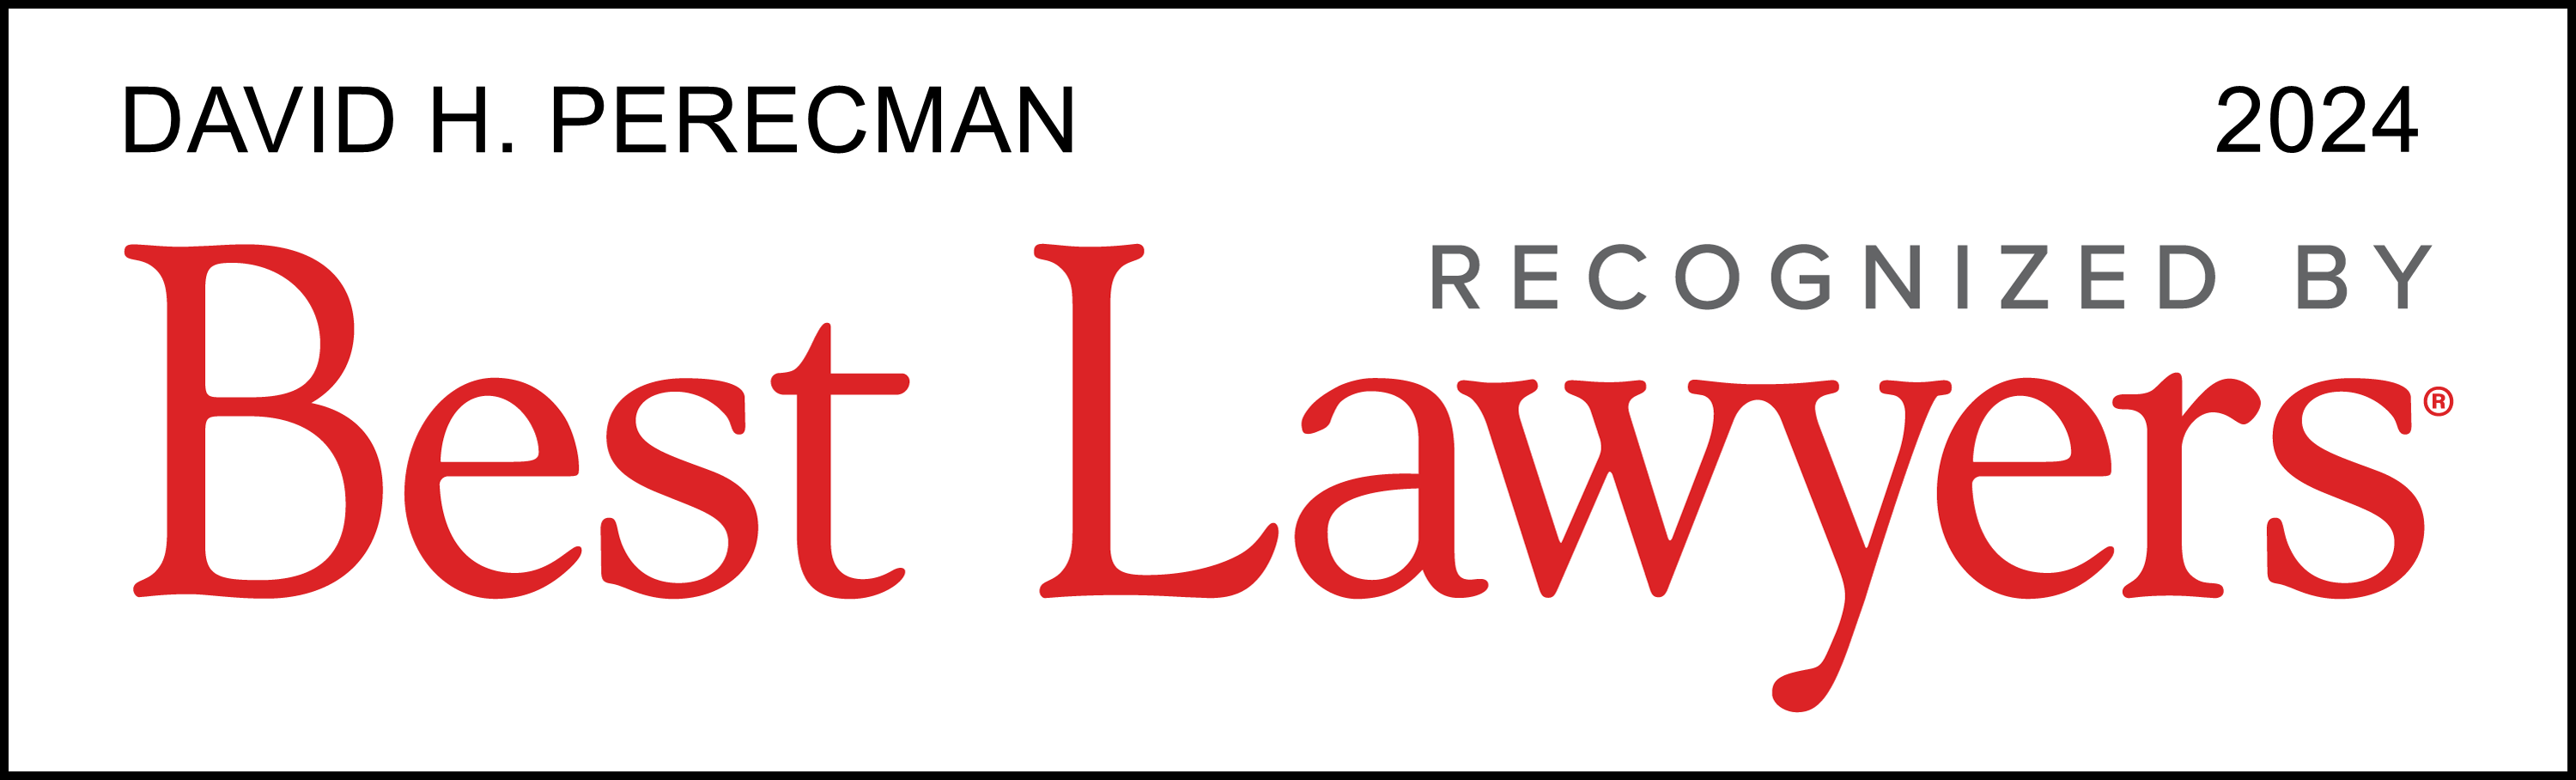 David H. Perecman recognized by Best Lawyers 2024